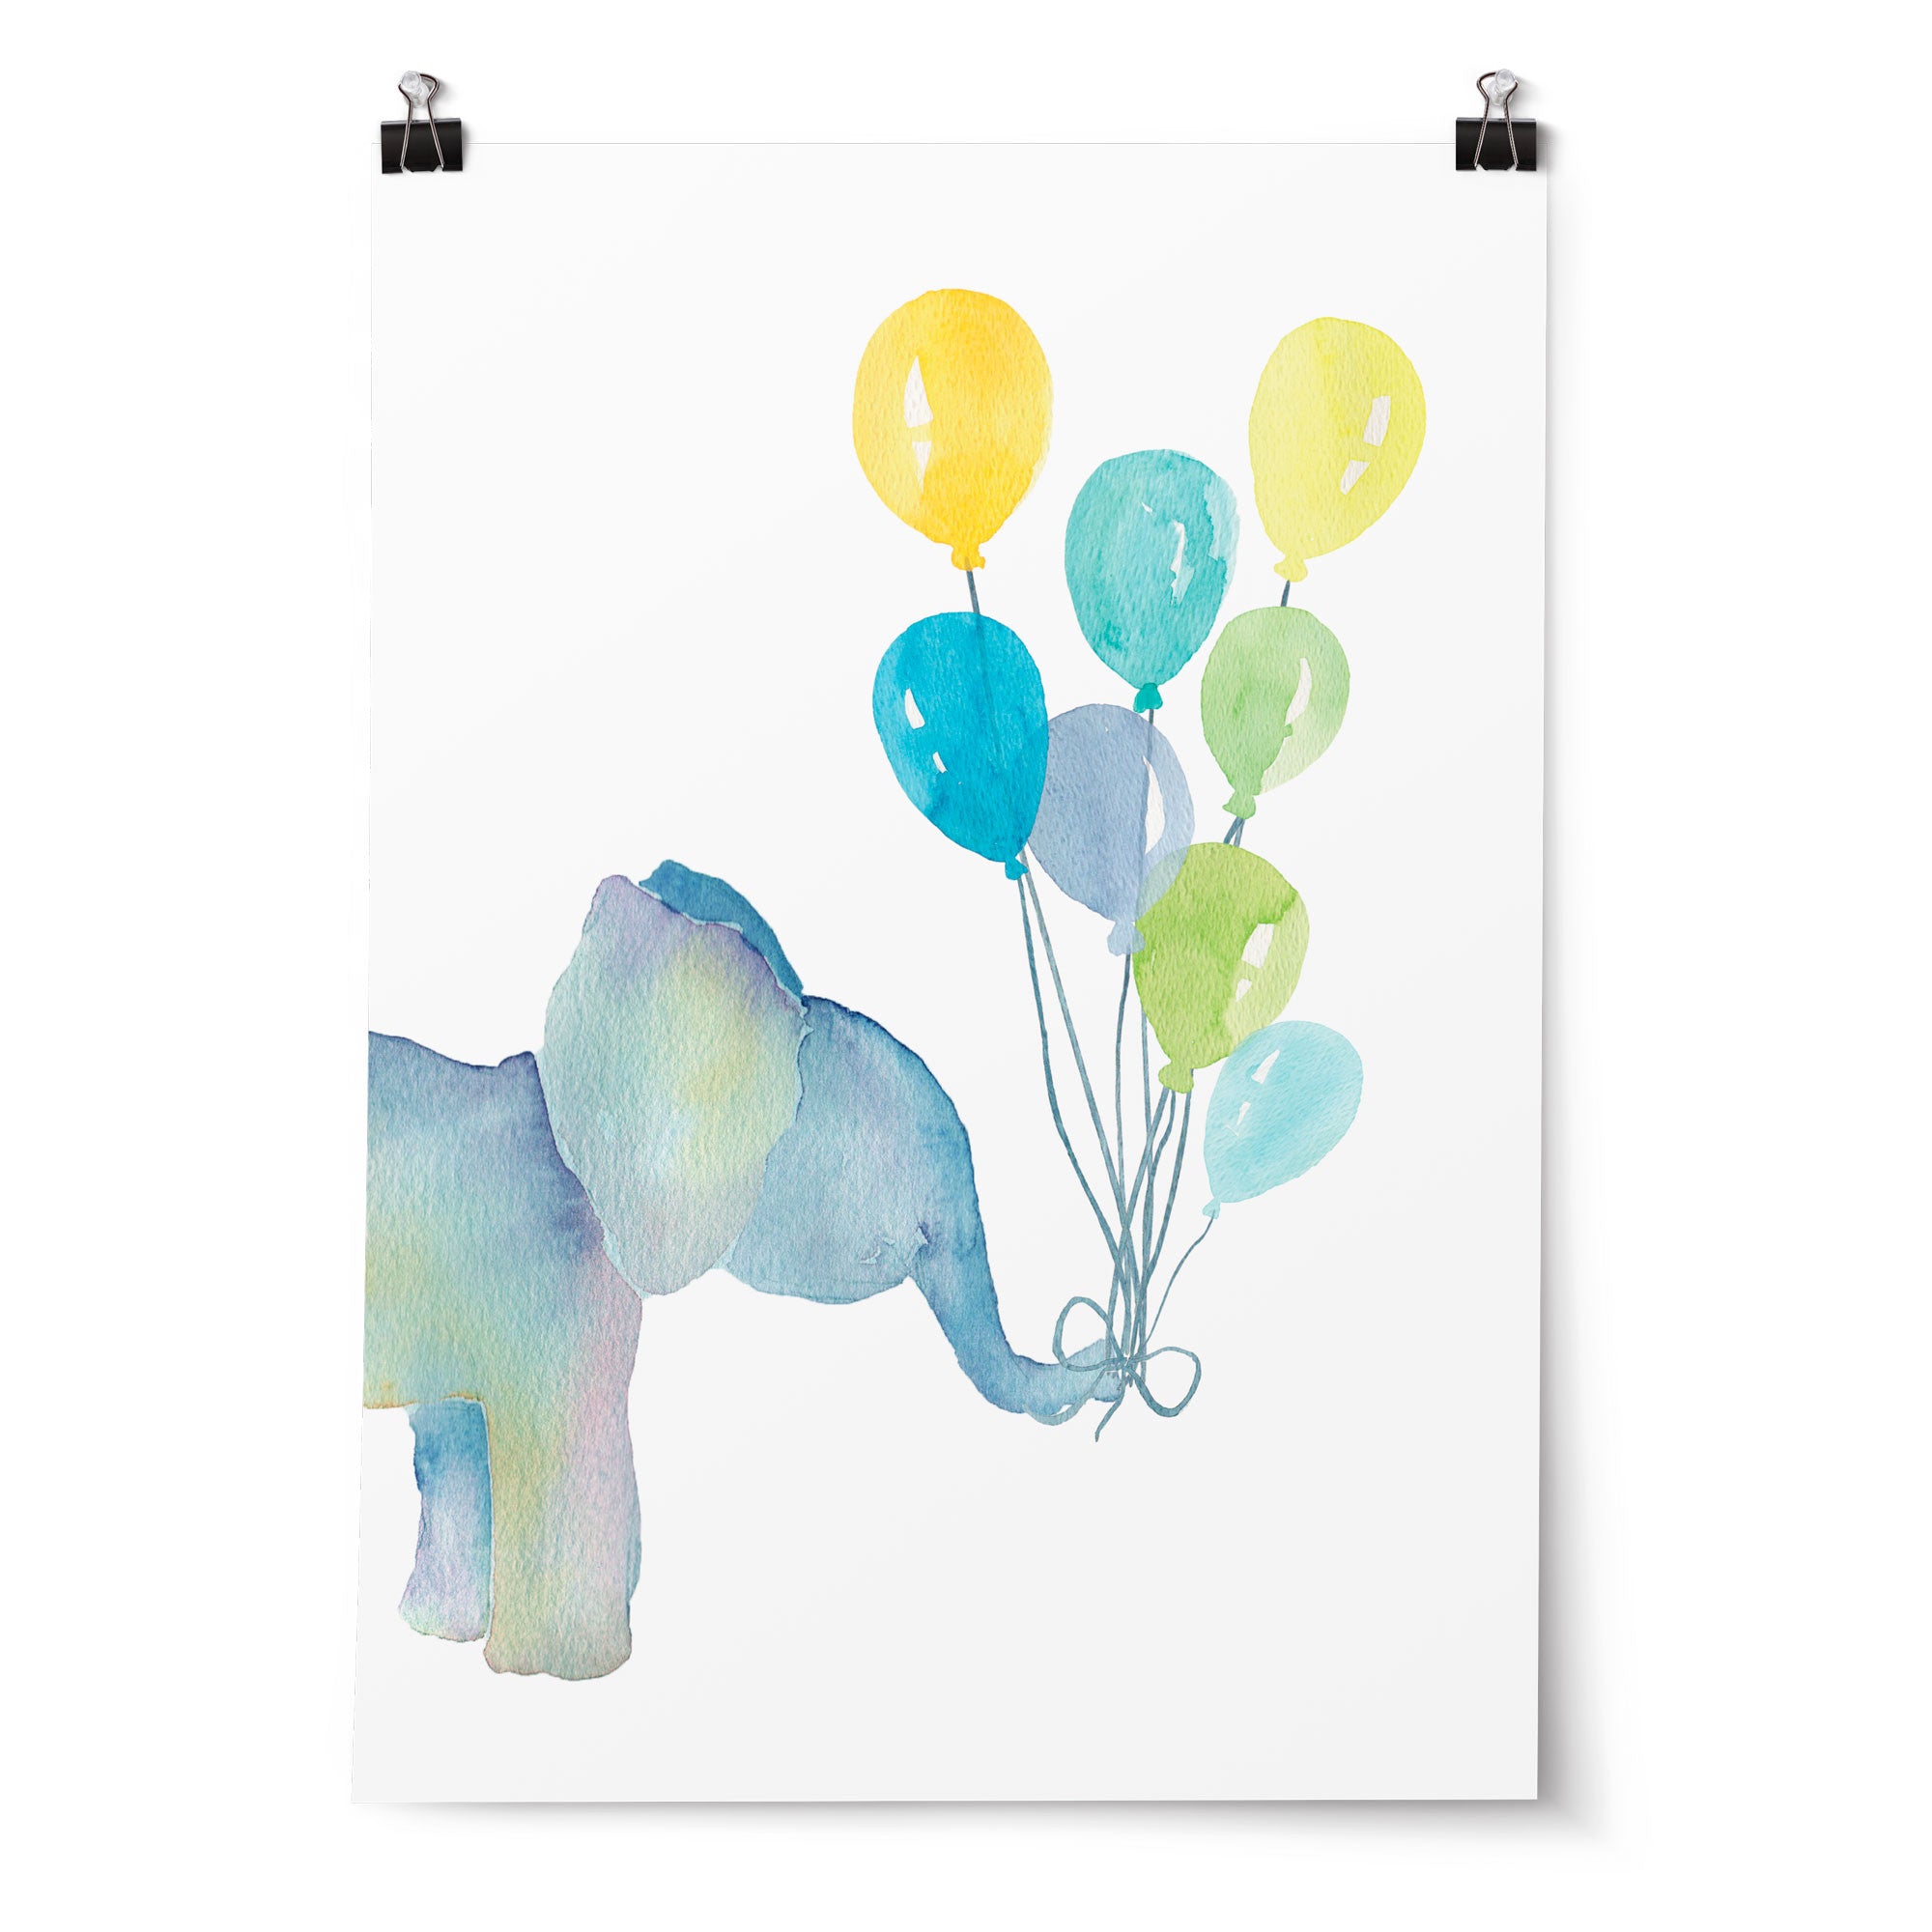 Watercolour Elephant with Balloons Print